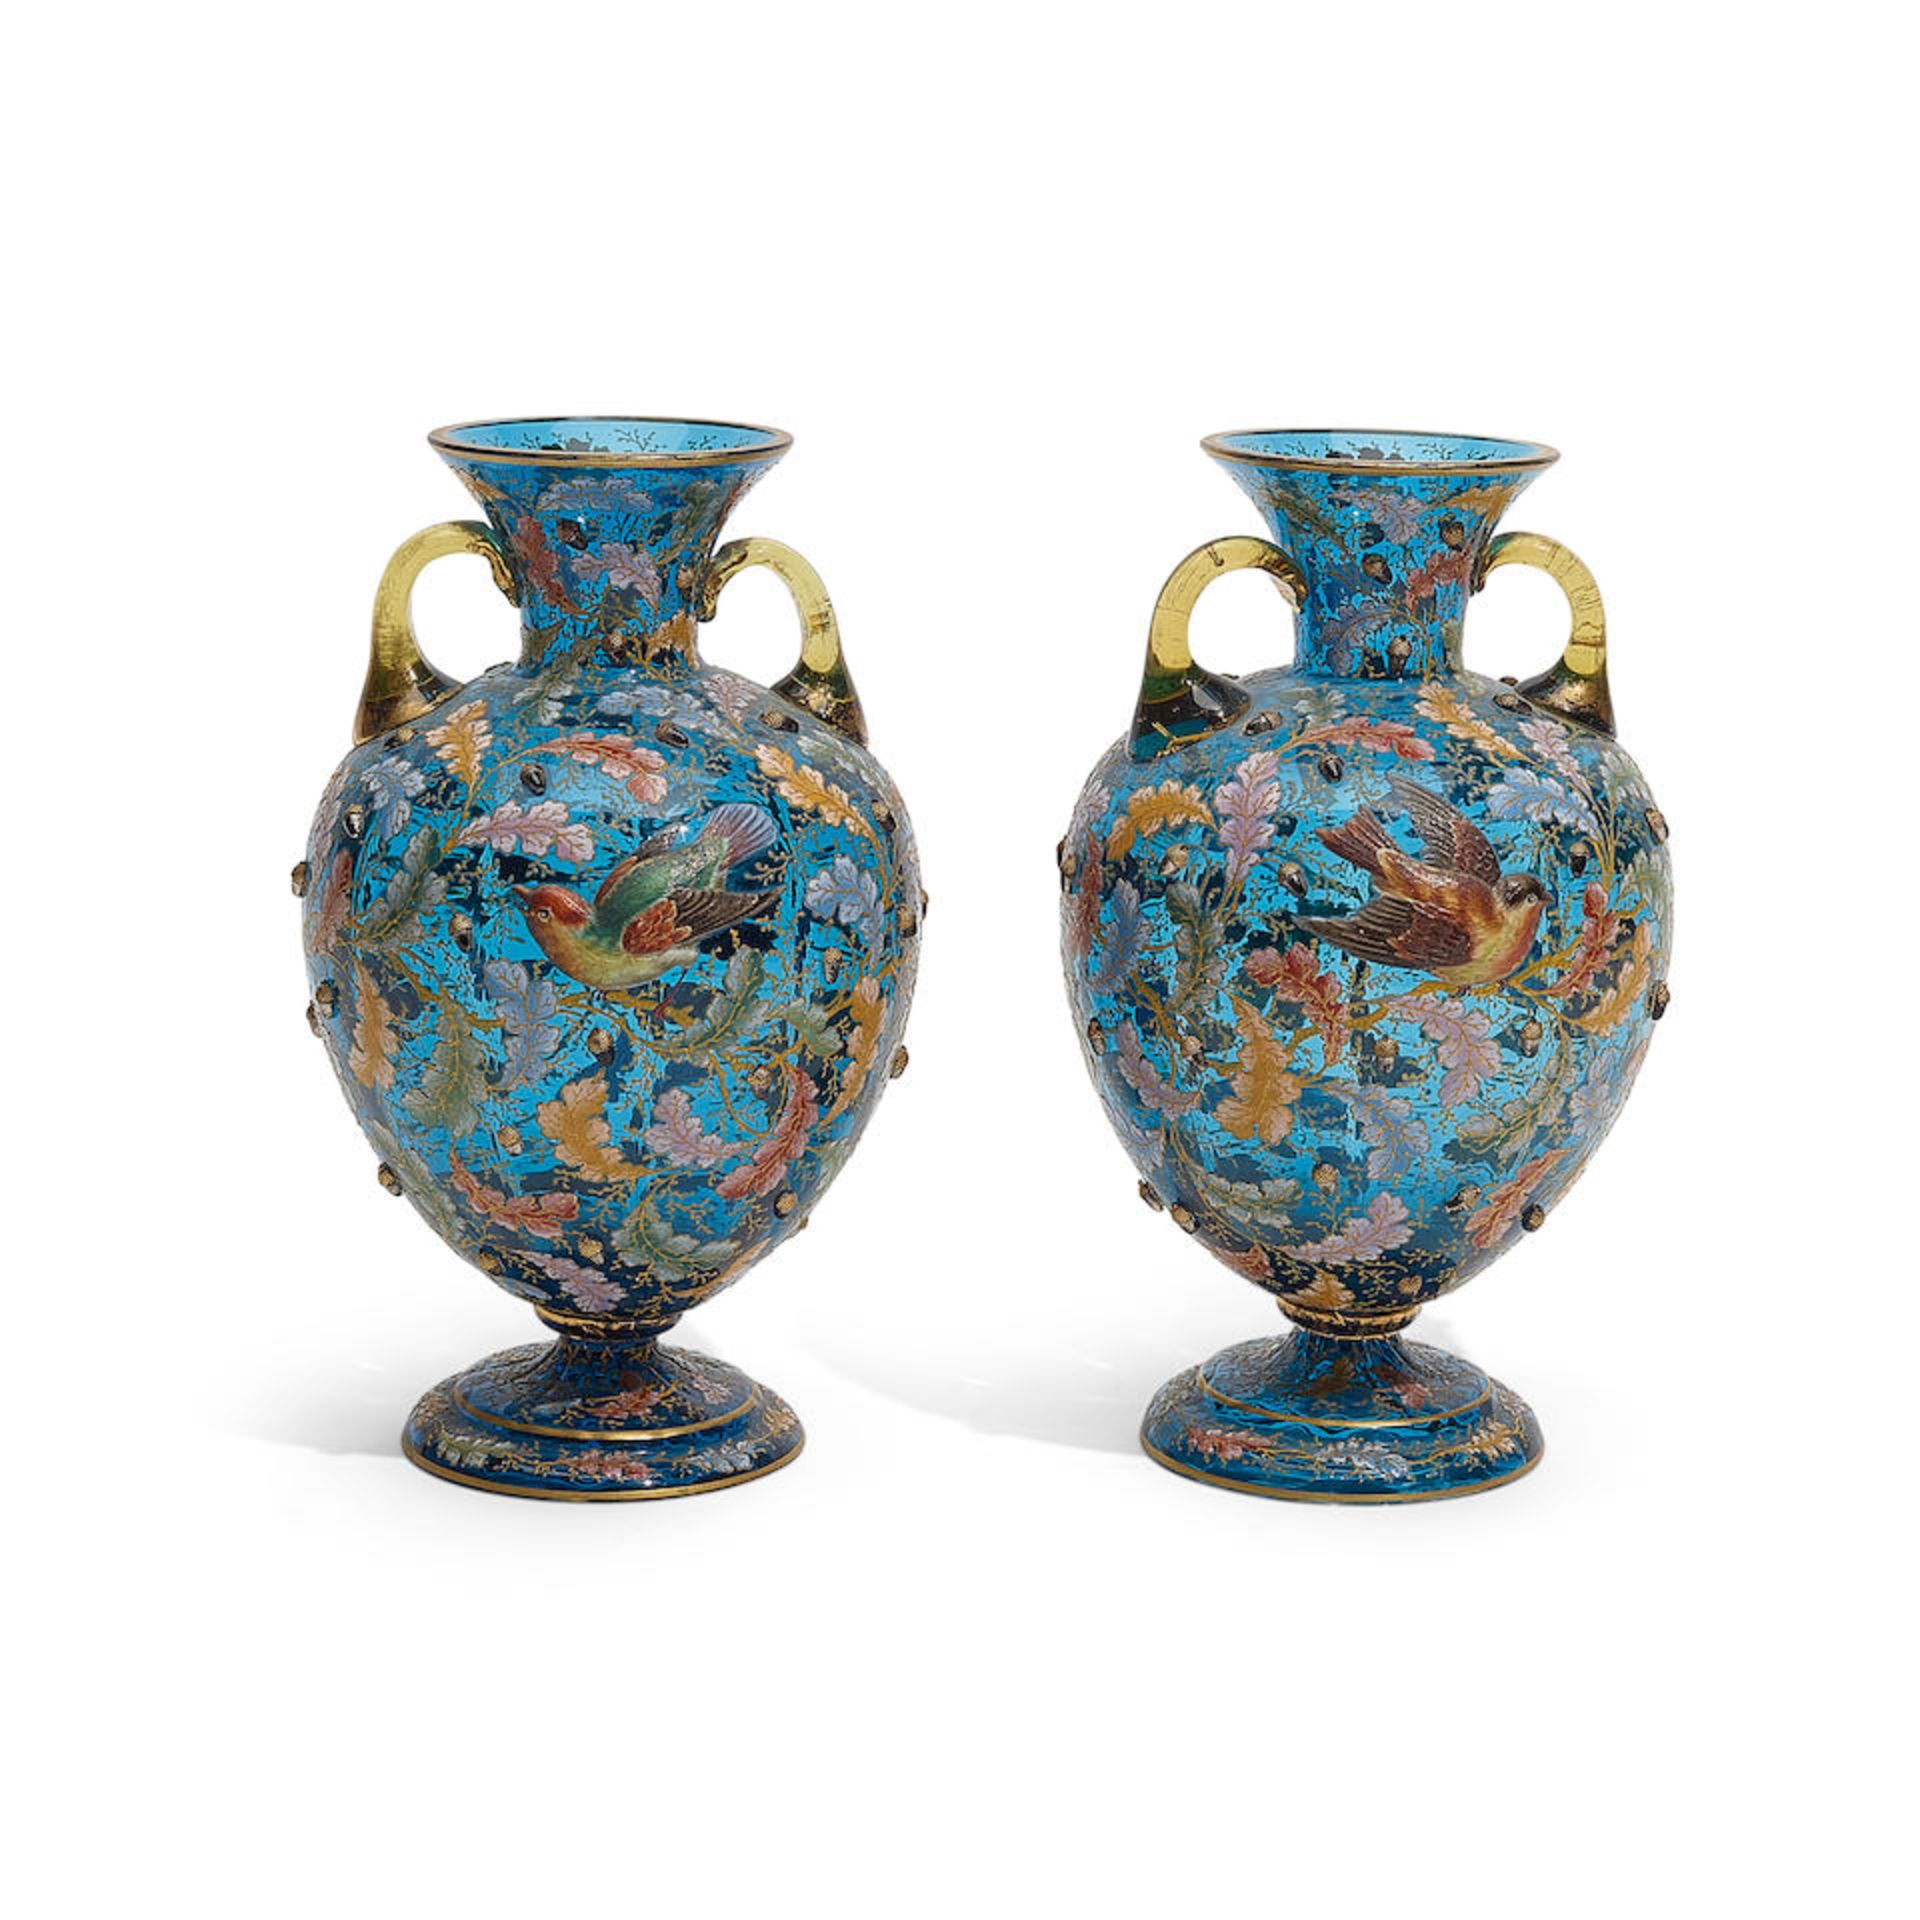 A PAIR OF MOSER ENAMELLED BLUE GLASS TWO-HANDLED FOOTED VASESEarly 20th century